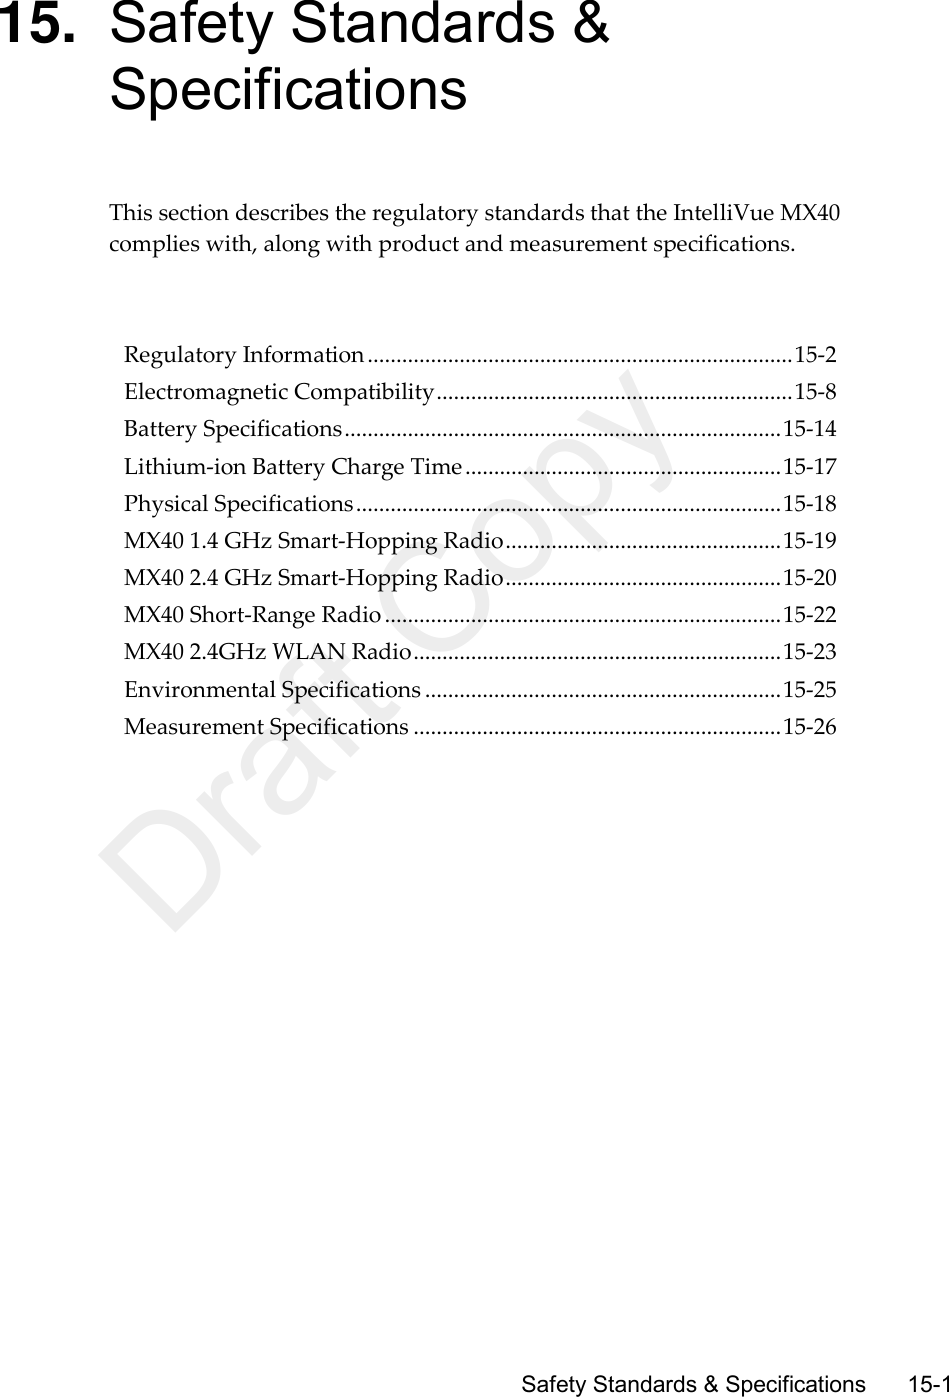      Safety Standards &amp; Specifications     15-1 15. Safety Standards &amp; Specifications This section describes the regulatory standards that the IntelliVue MX40 complies with, along with product and measurement specifications.      Regulatory Information .......................................................................... 15-2 Electromagnetic Compatibility .............................................................. 15-8 Battery Specifications ............................................................................ 15-14 Lithium-ion Battery Charge Time ....................................................... 15-17 Physical Specifications .......................................................................... 15-18 MX40 1.4 GHz Smart-Hopping Radio ................................................ 15-19 MX40 2.4 GHz Smart-Hopping Radio ................................................ 15-20 MX40 Short-Range Radio ..................................................................... 15-22 MX40 2.4GHz WLAN Radio ................................................................ 15-23 Environmental Specifications .............................................................. 15-25 Measurement Specifications ................................................................ 15-26   Draft Copy